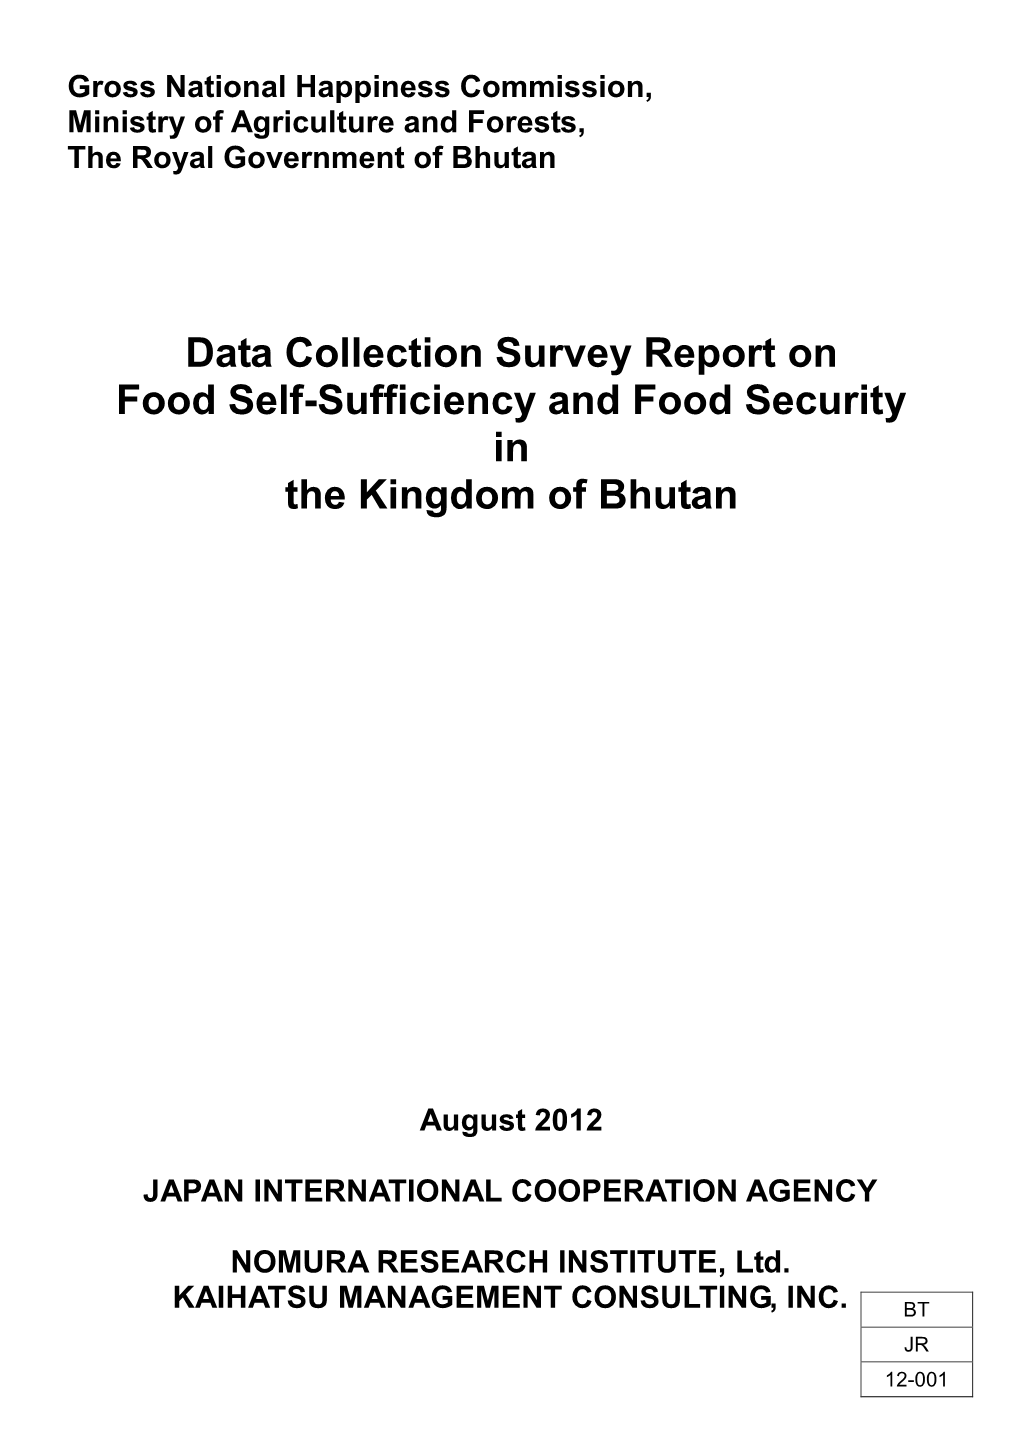 Data Collection Survey Report on Food Self-Sufficiency and Food Security in the Kingdom of Bhutan